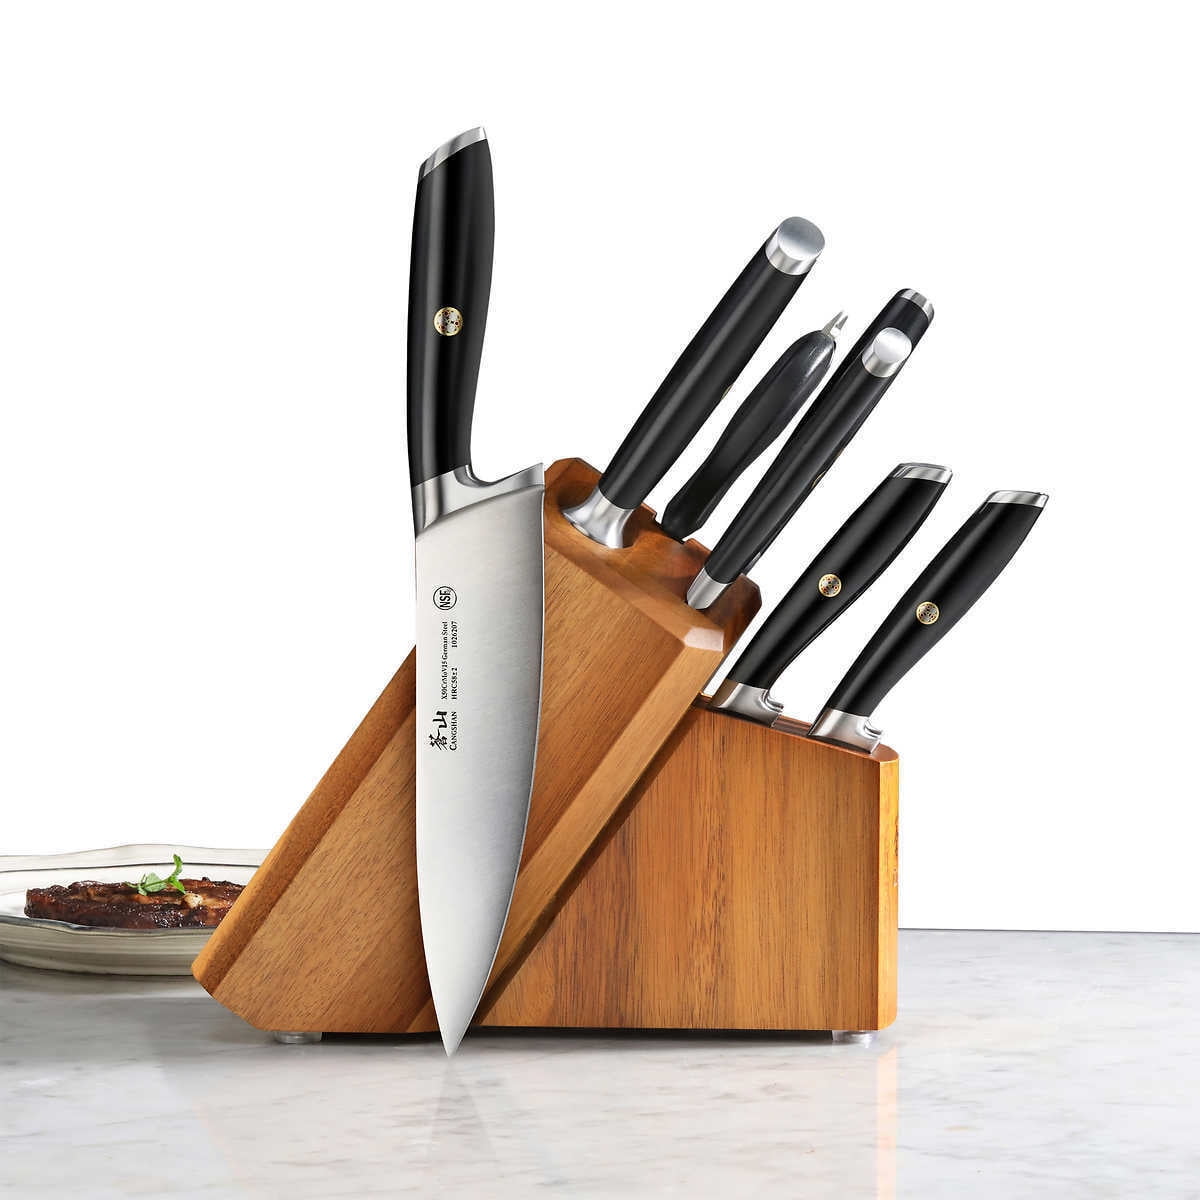 Beautiful 12 Piece Knife Block Set with Soft-Grip Ergonomic Handles White and Gold by Drew Barrymore